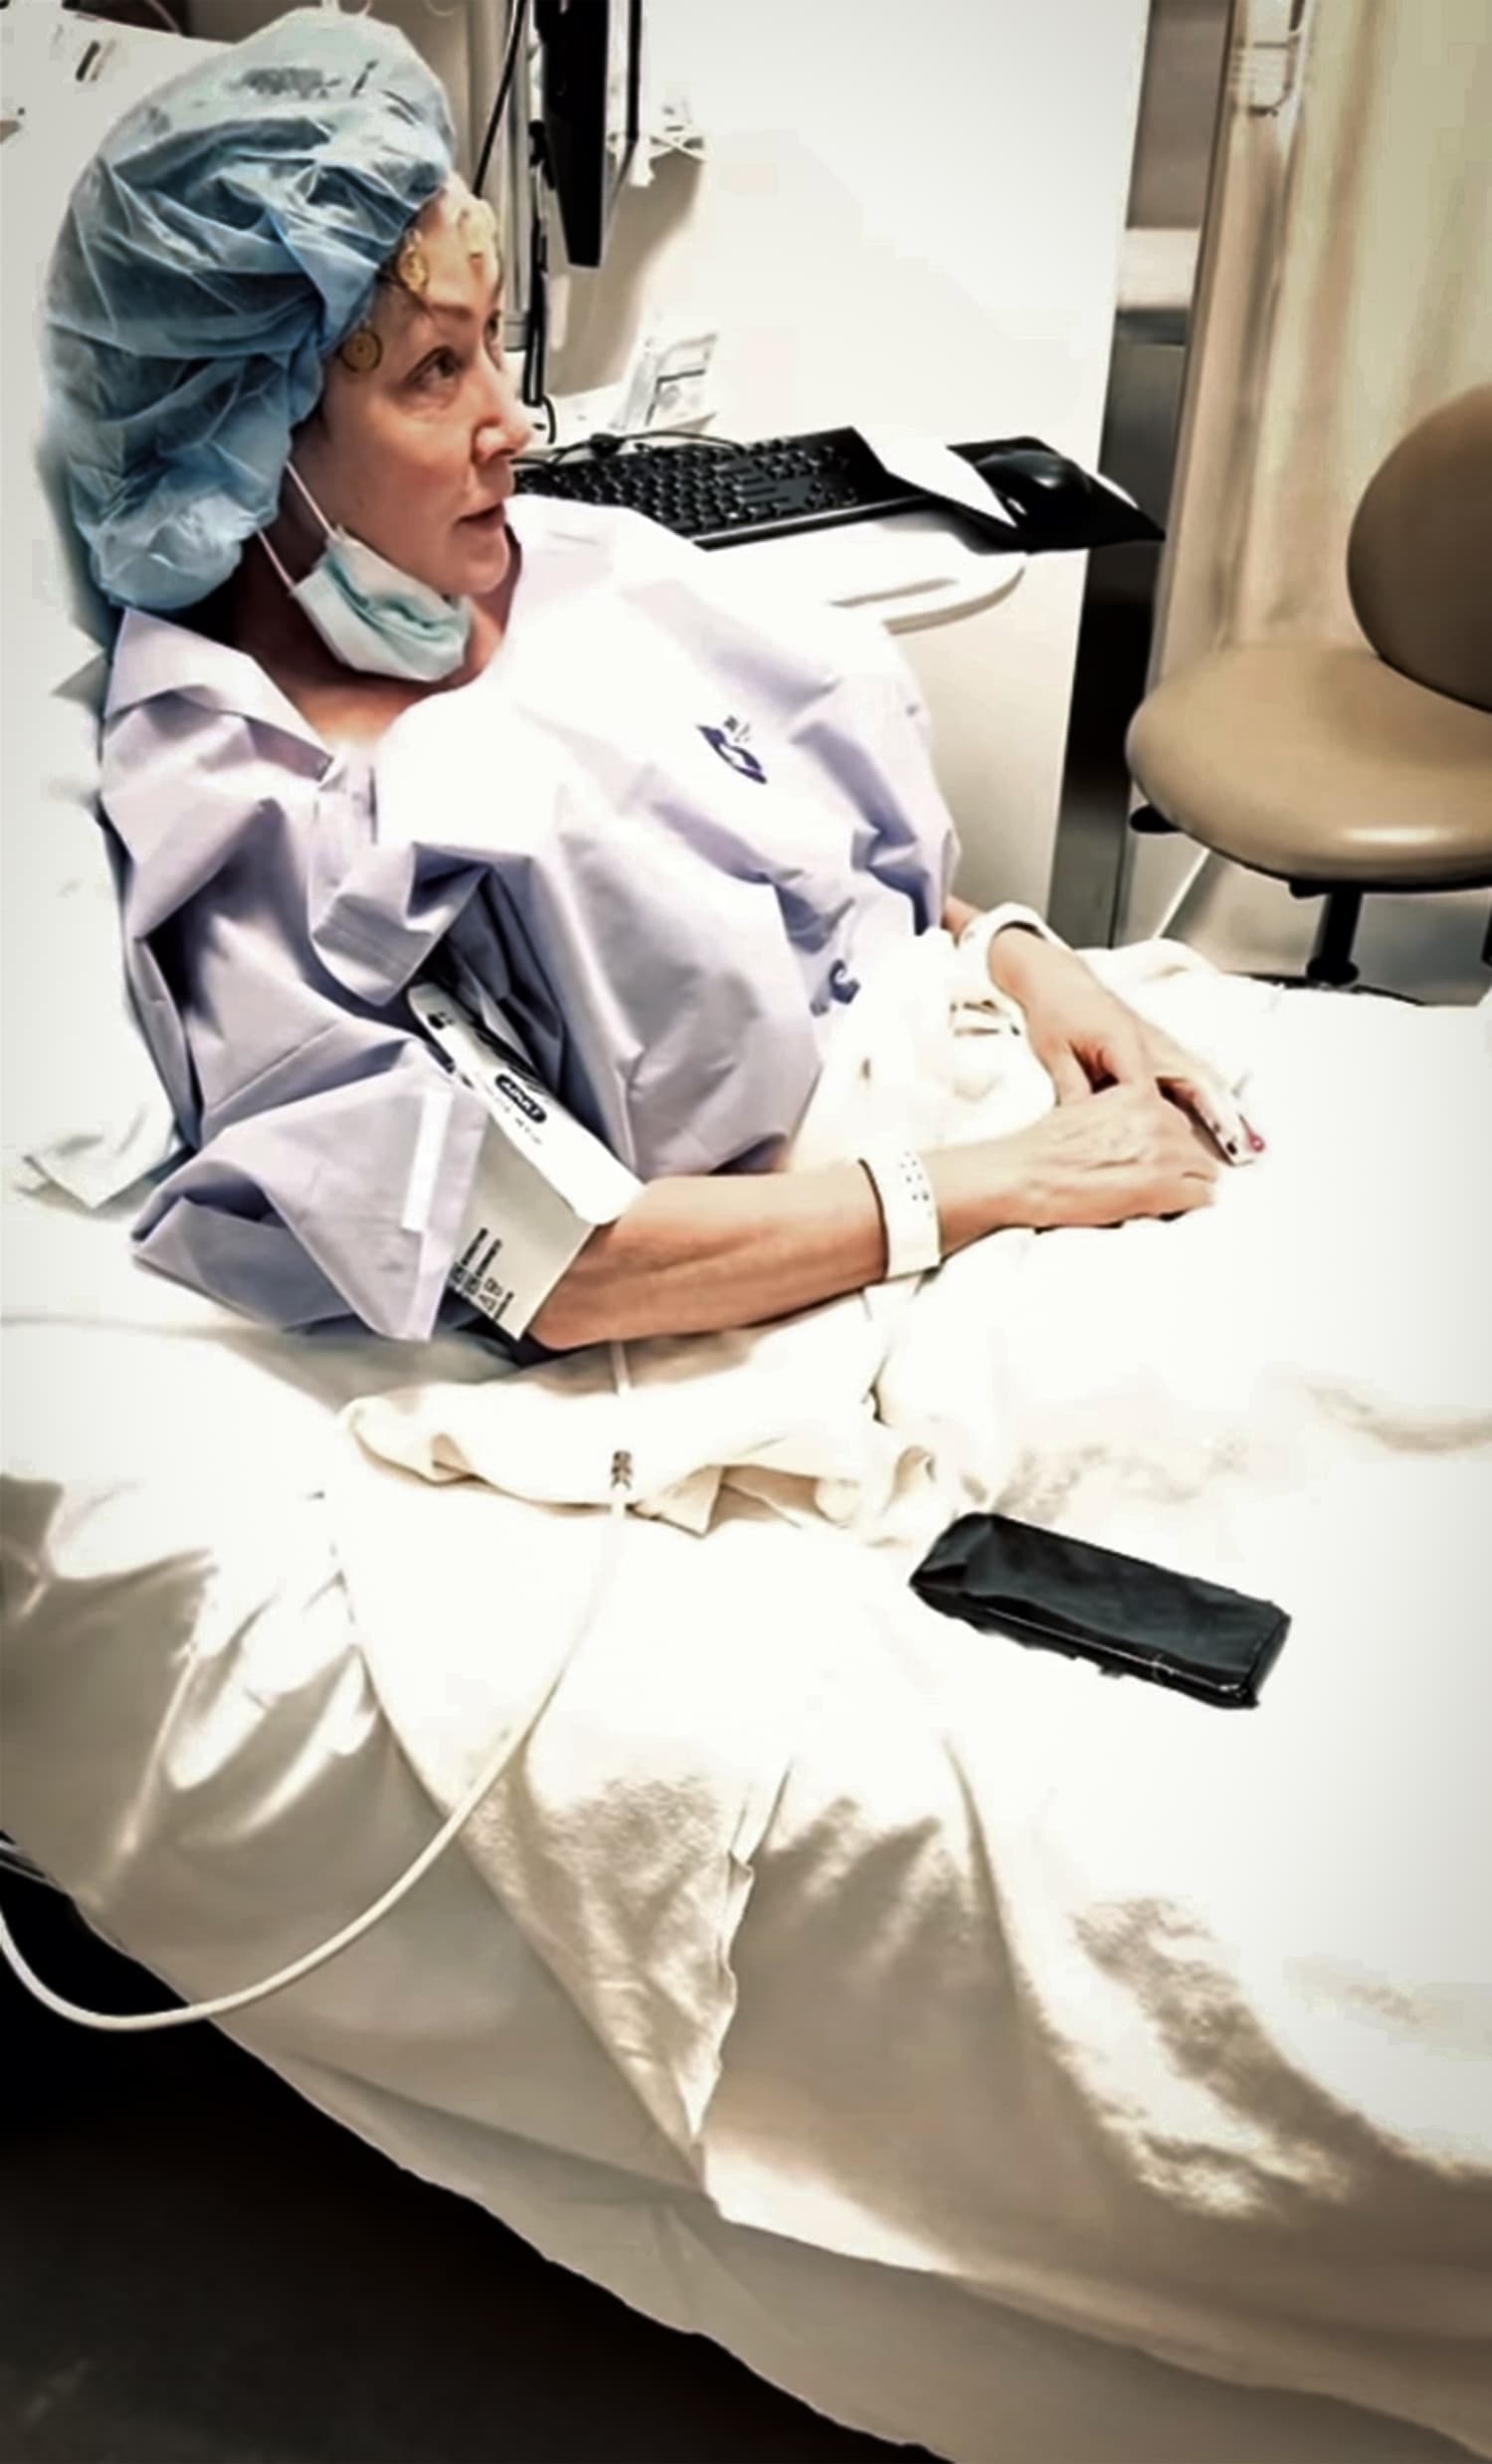 Shannen Doherty shares video before surgery to remove tumor from her head: ‘I am petrified’